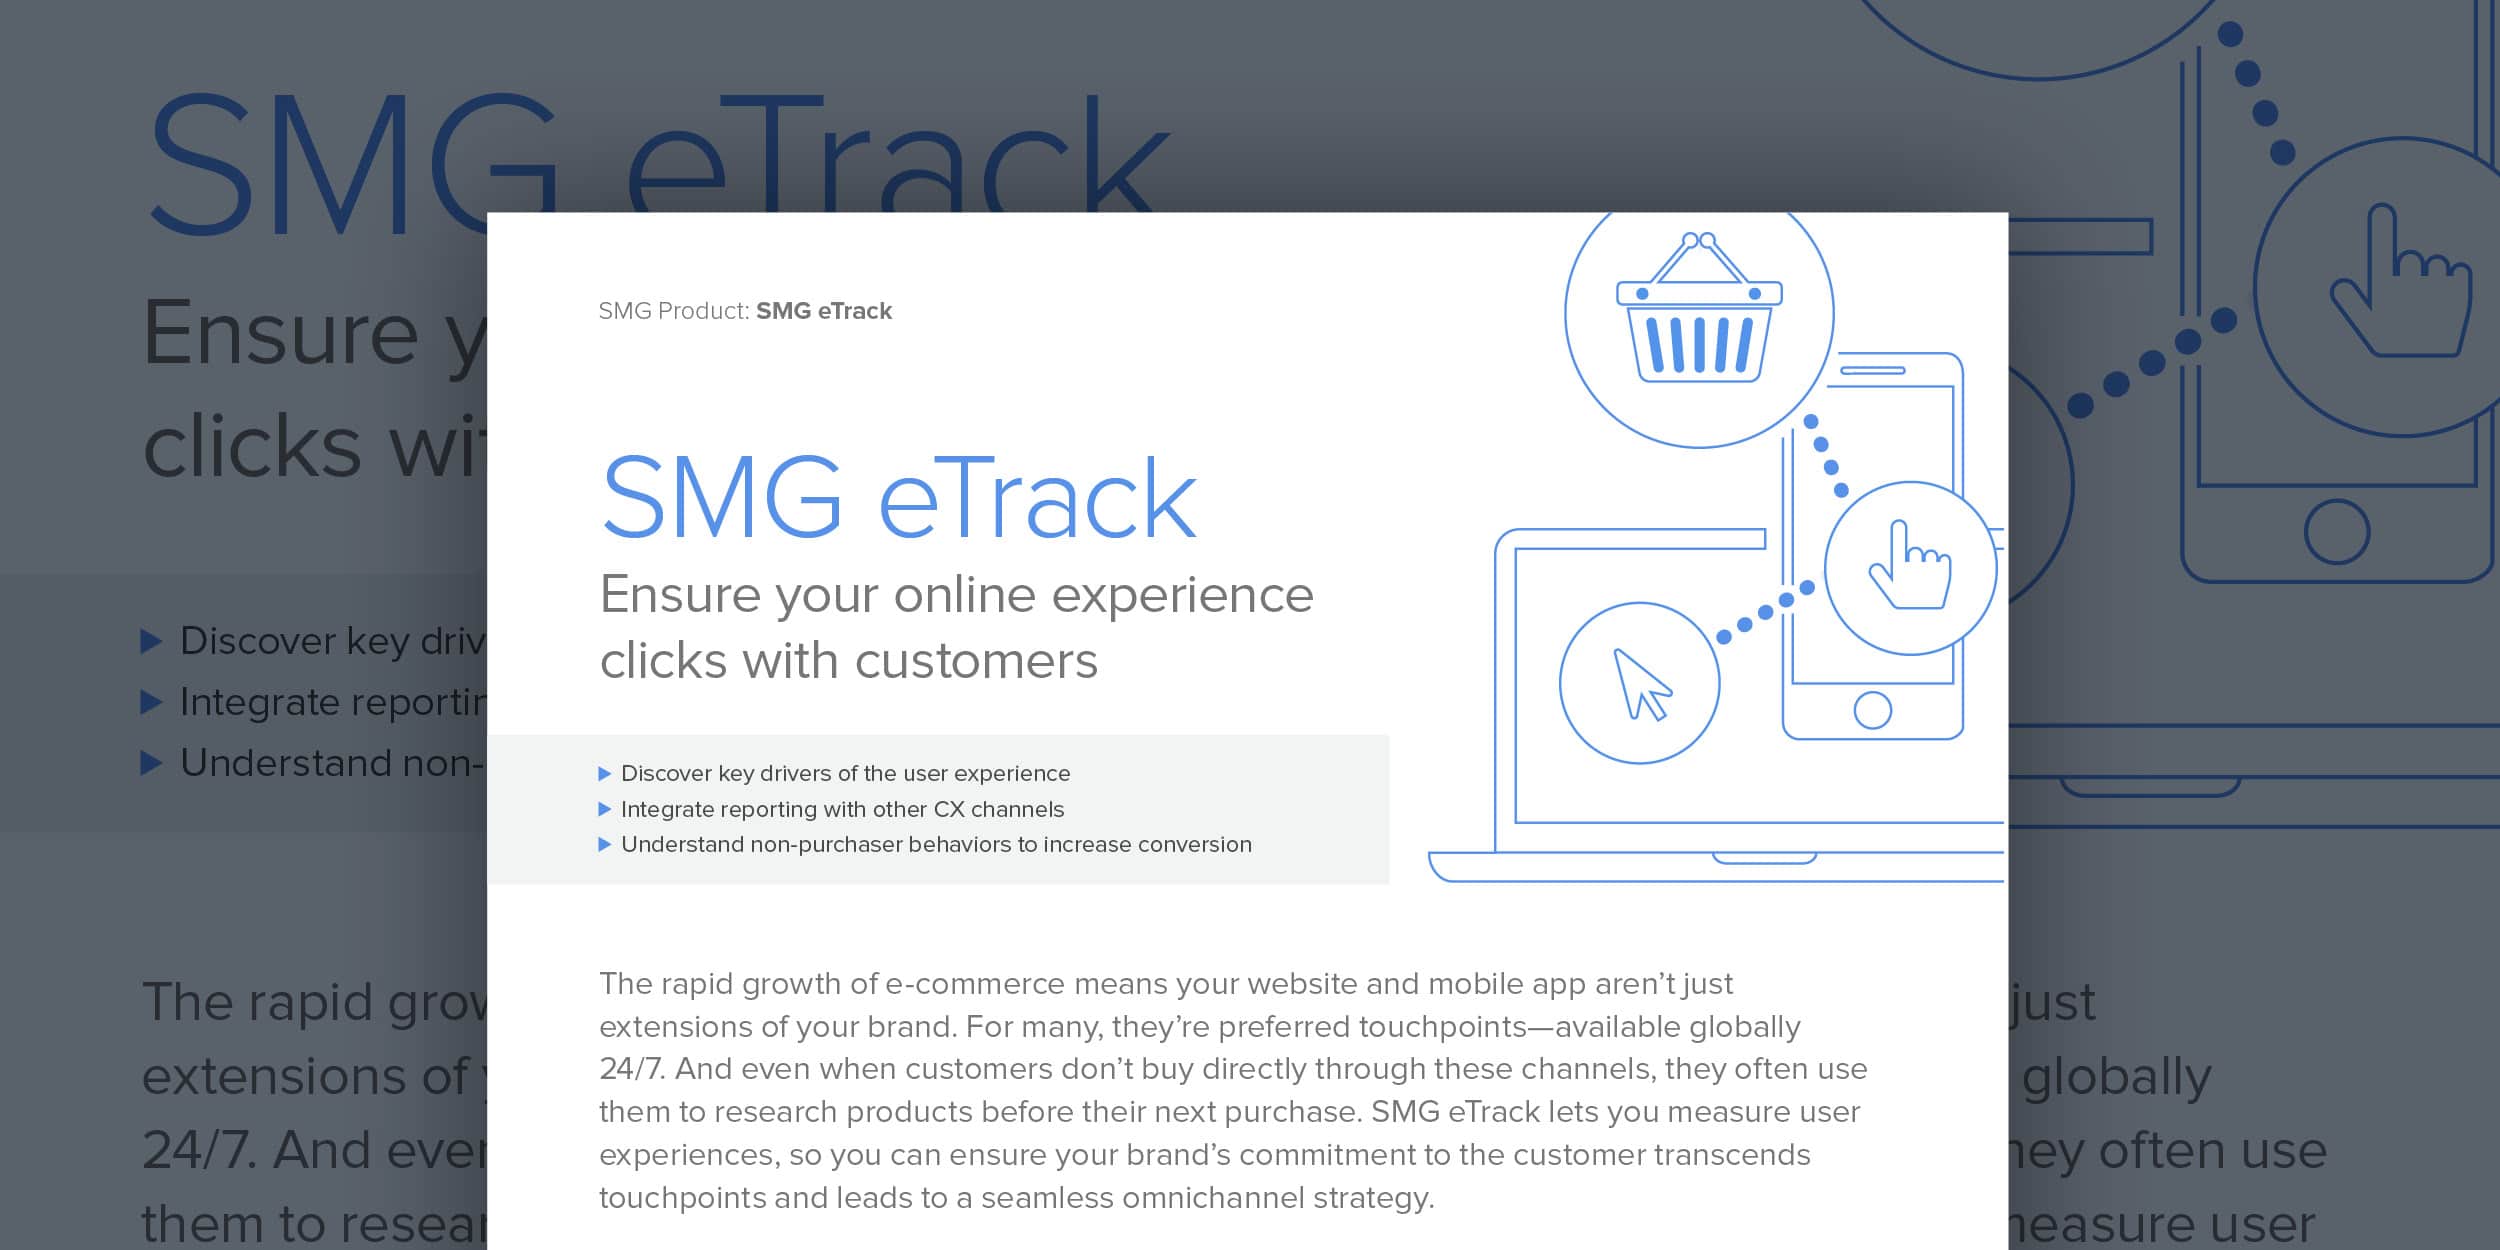 SMG eTrack